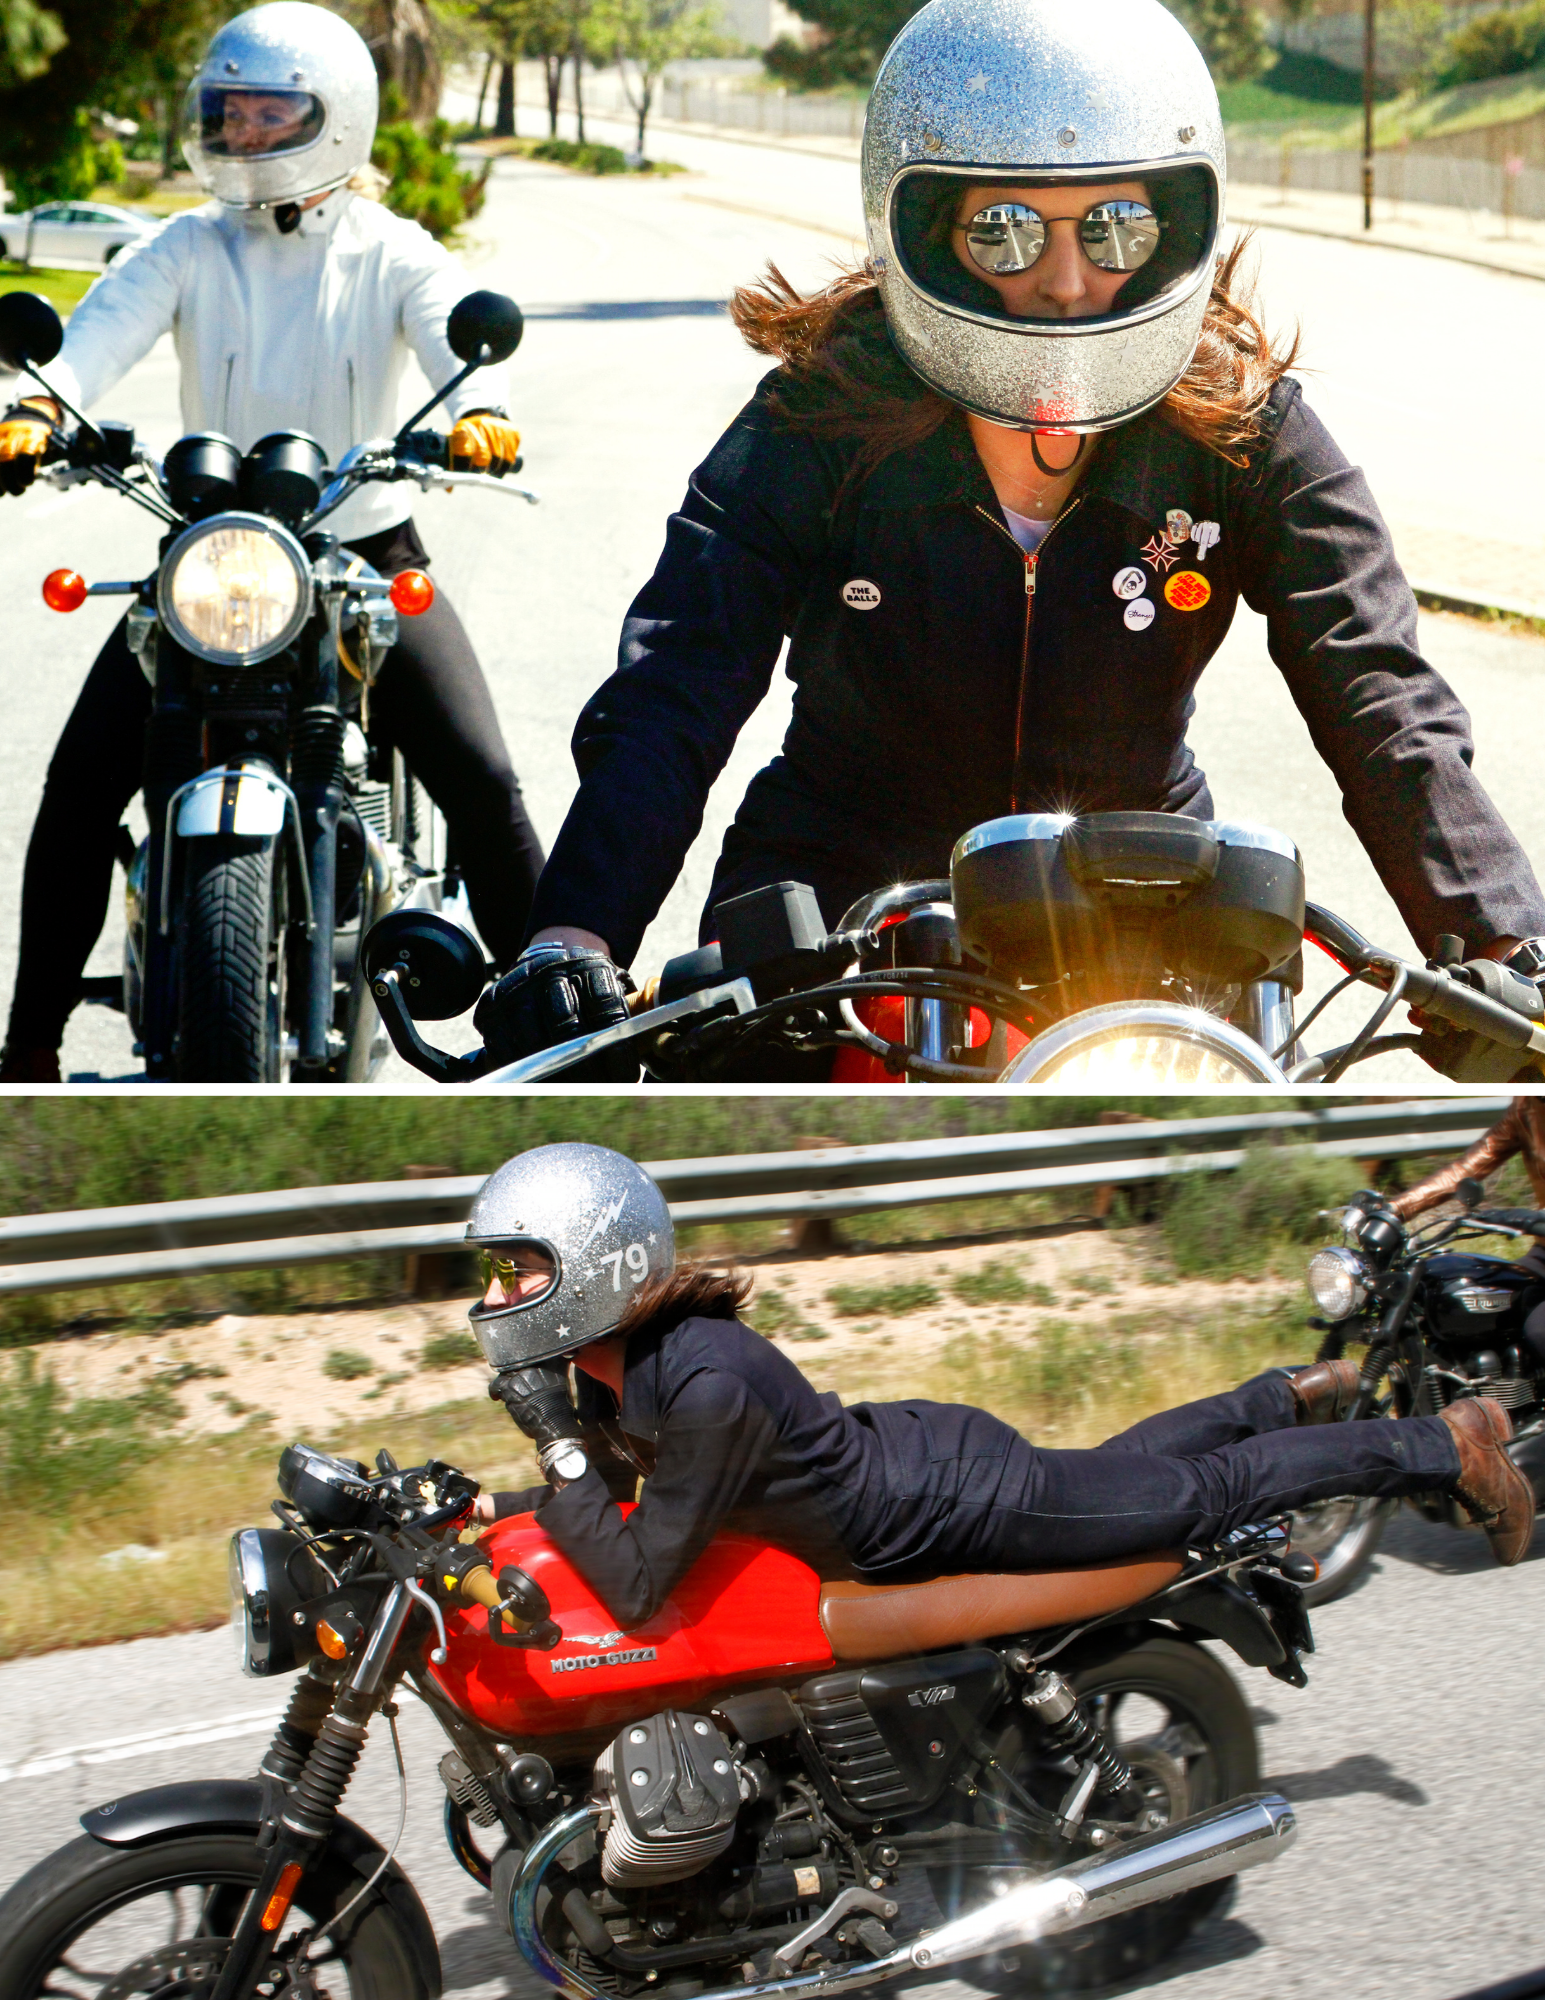 Female Motorcyclists wearing protective motorcycle gear